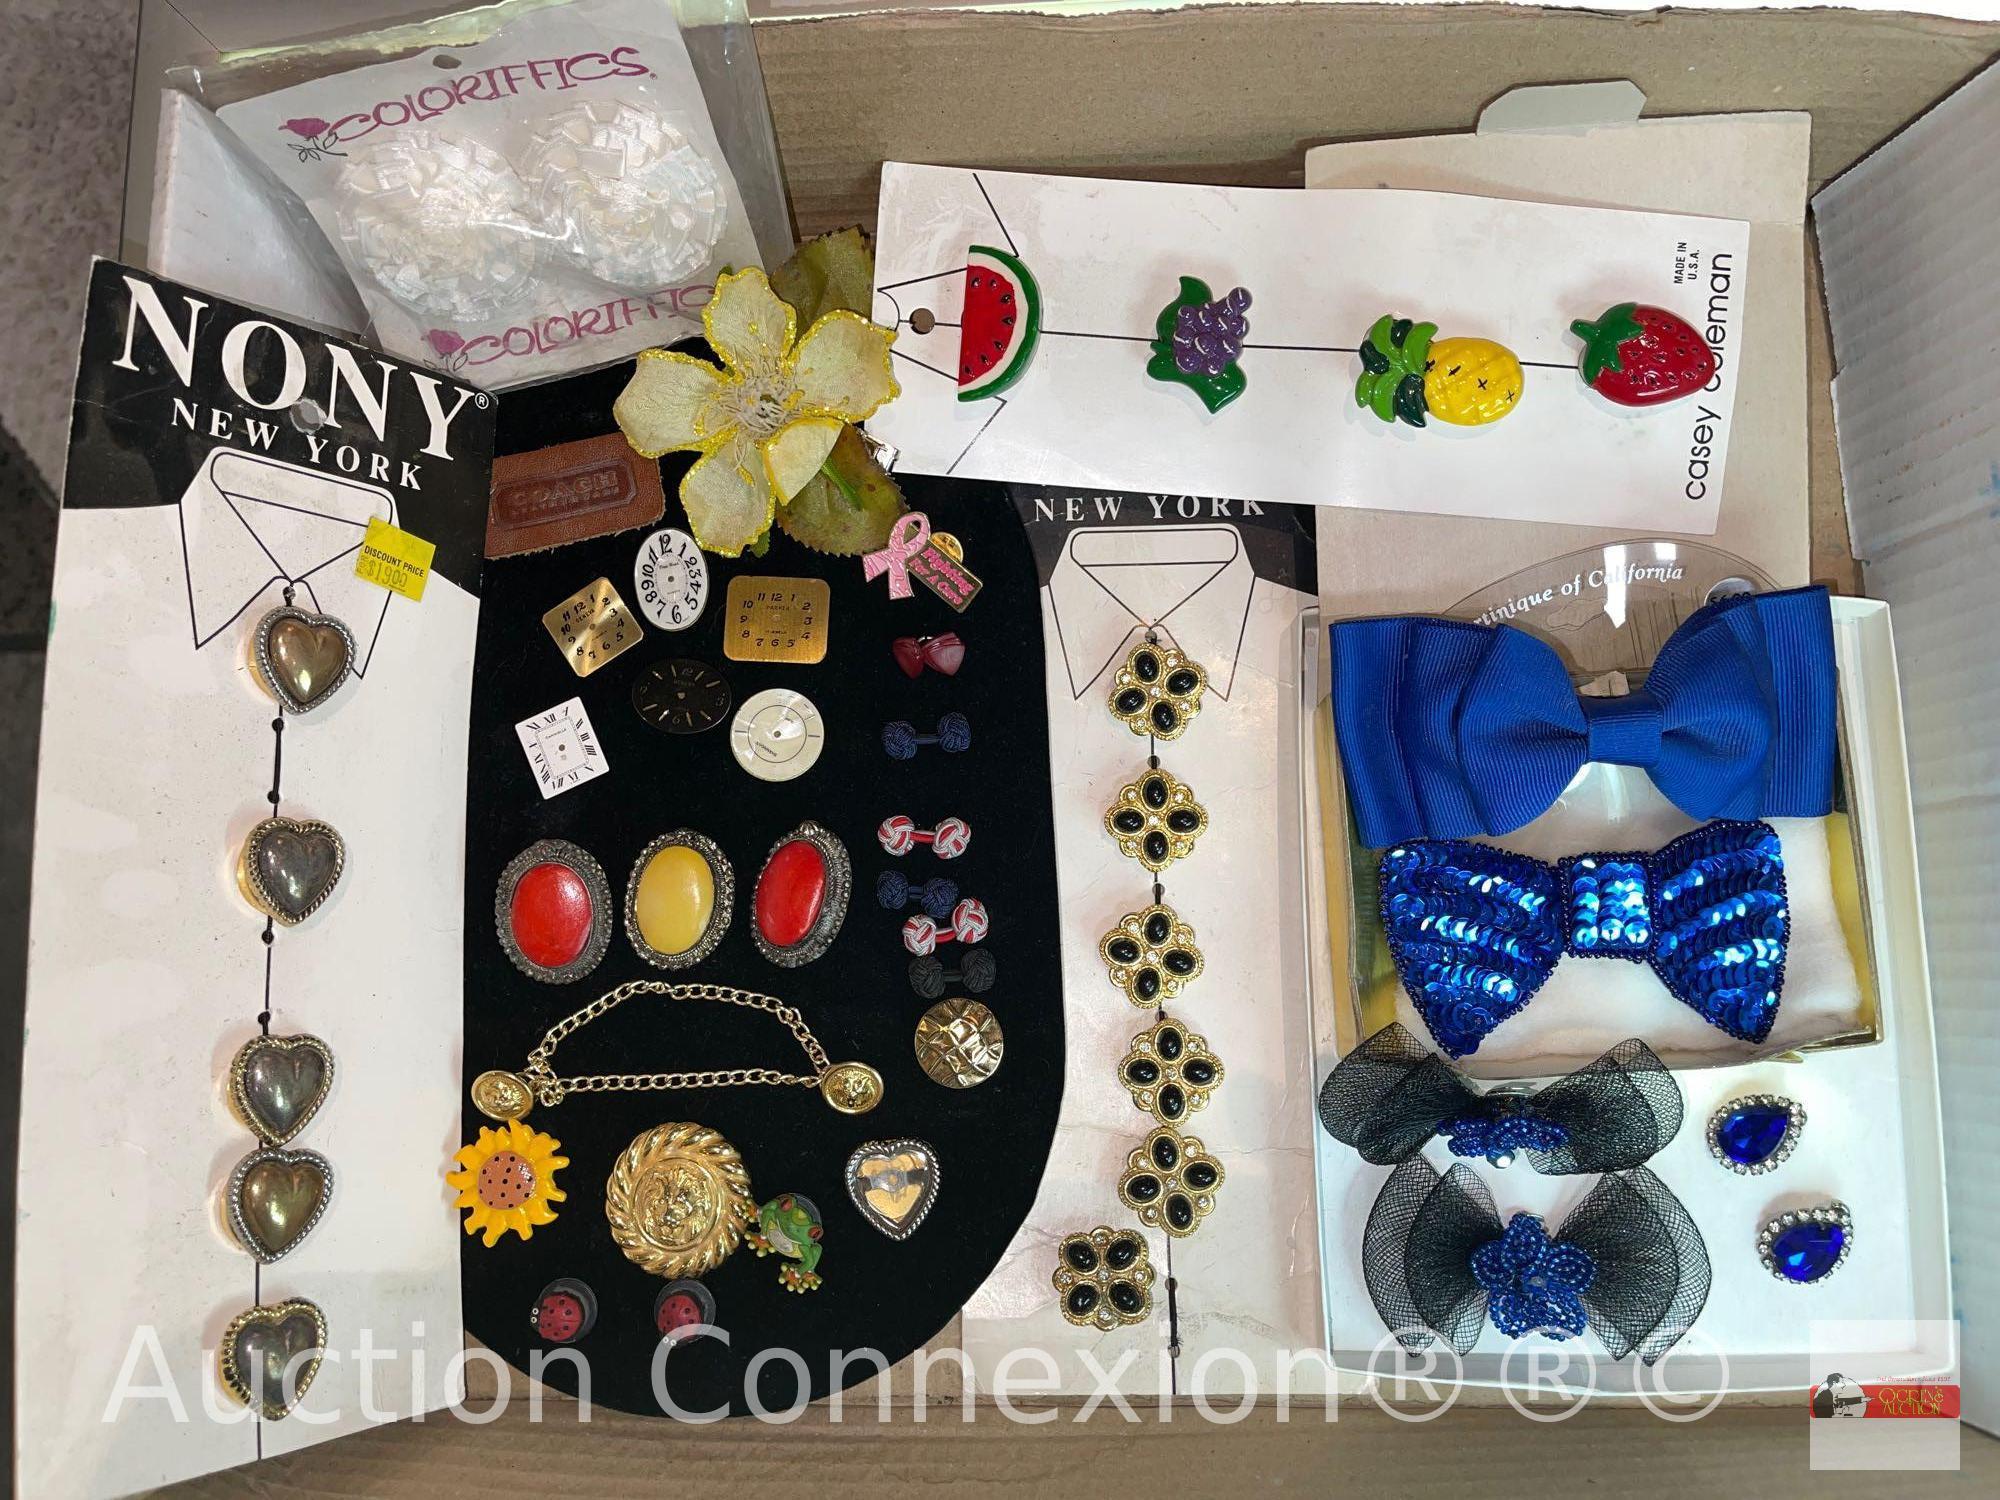 Jewelry - Button covers, hair clips, shoe clips and pr. rhinestone earrings